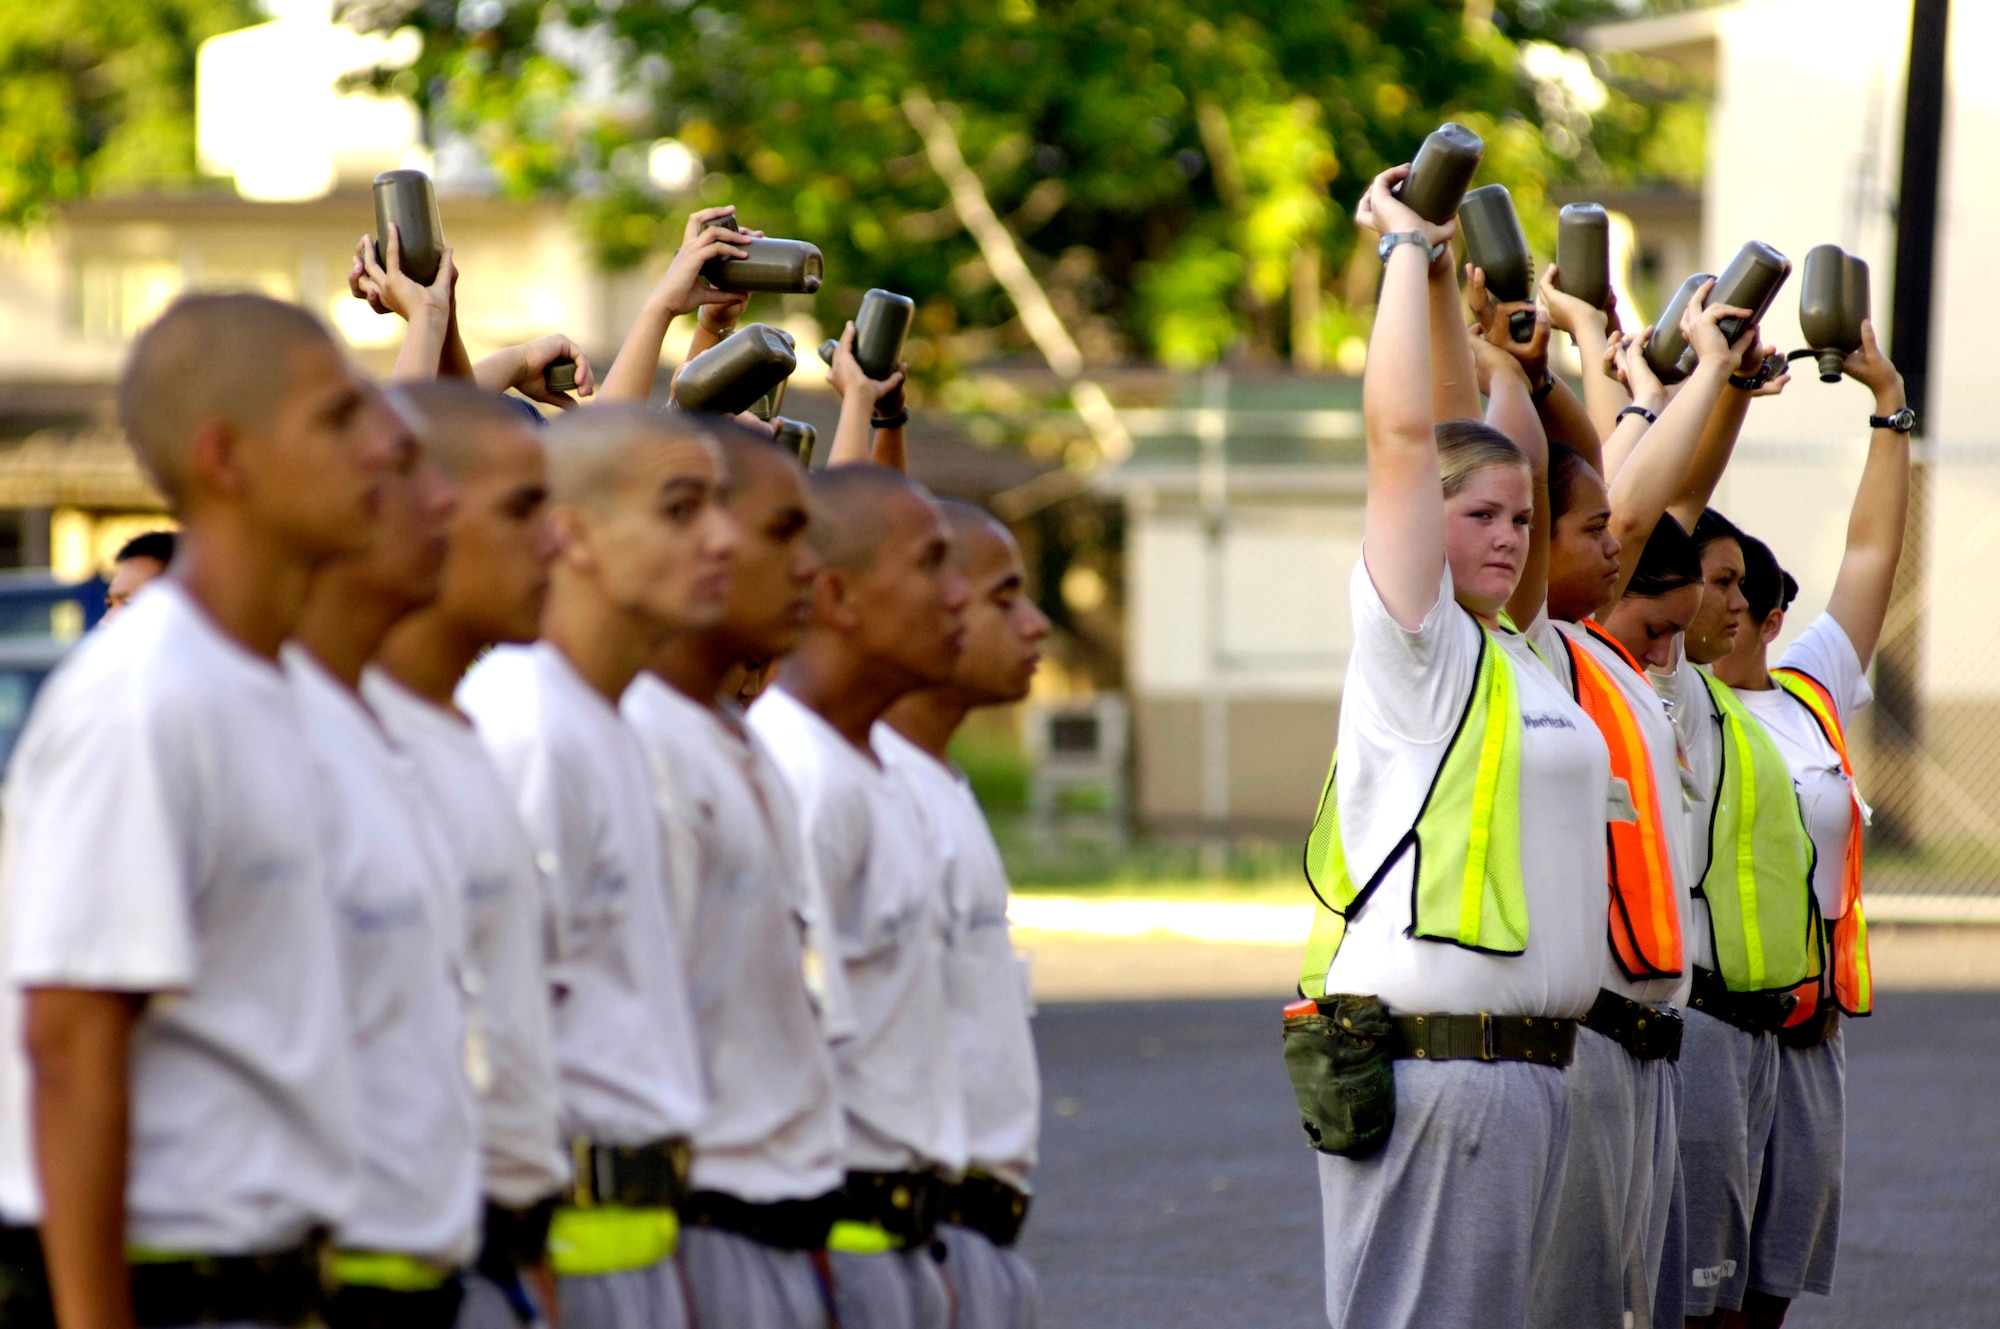 Cadets hold their canteens over their heads to show they finished all their water at the Hawaii National Guard Youth Challenge Academy in Kapolei, Hawaii, on Thursday, May 18, 2006. The academy staff teach life skills to non-traditional students so they can be successful in the community and earn a high school diploma.  (U.S. Air Force photo/Tech. Sgt. Shane A. Cuomo)